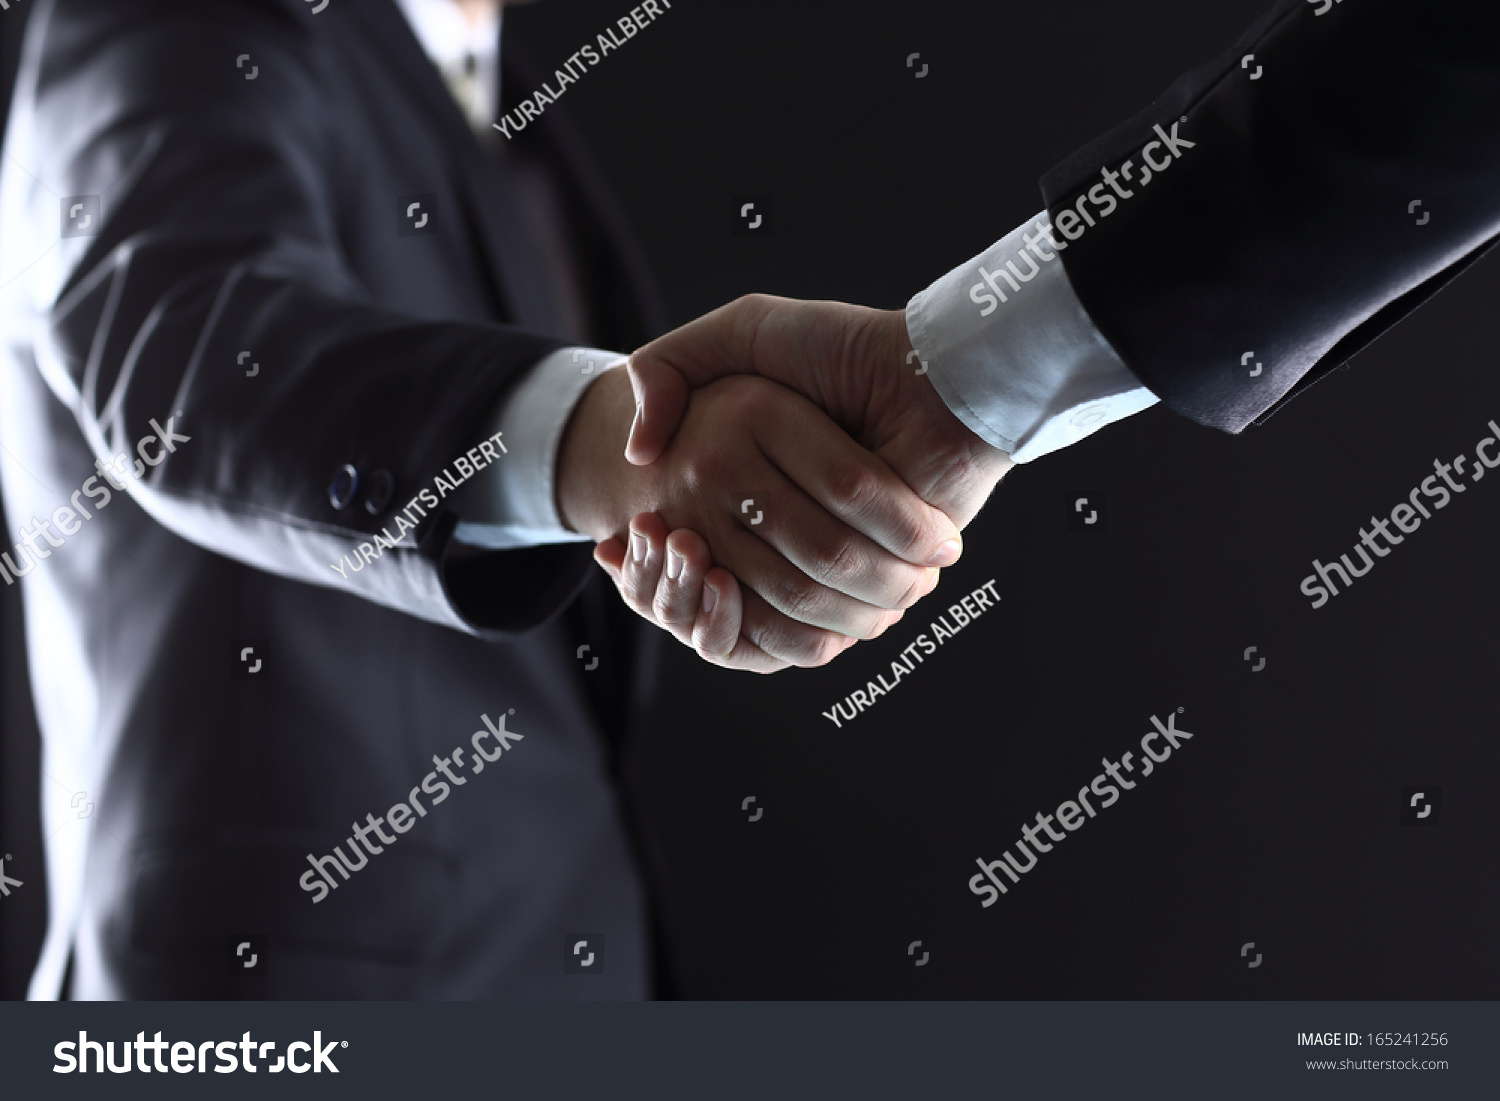 Business people shaking hands, finishing up a meeting #165241256